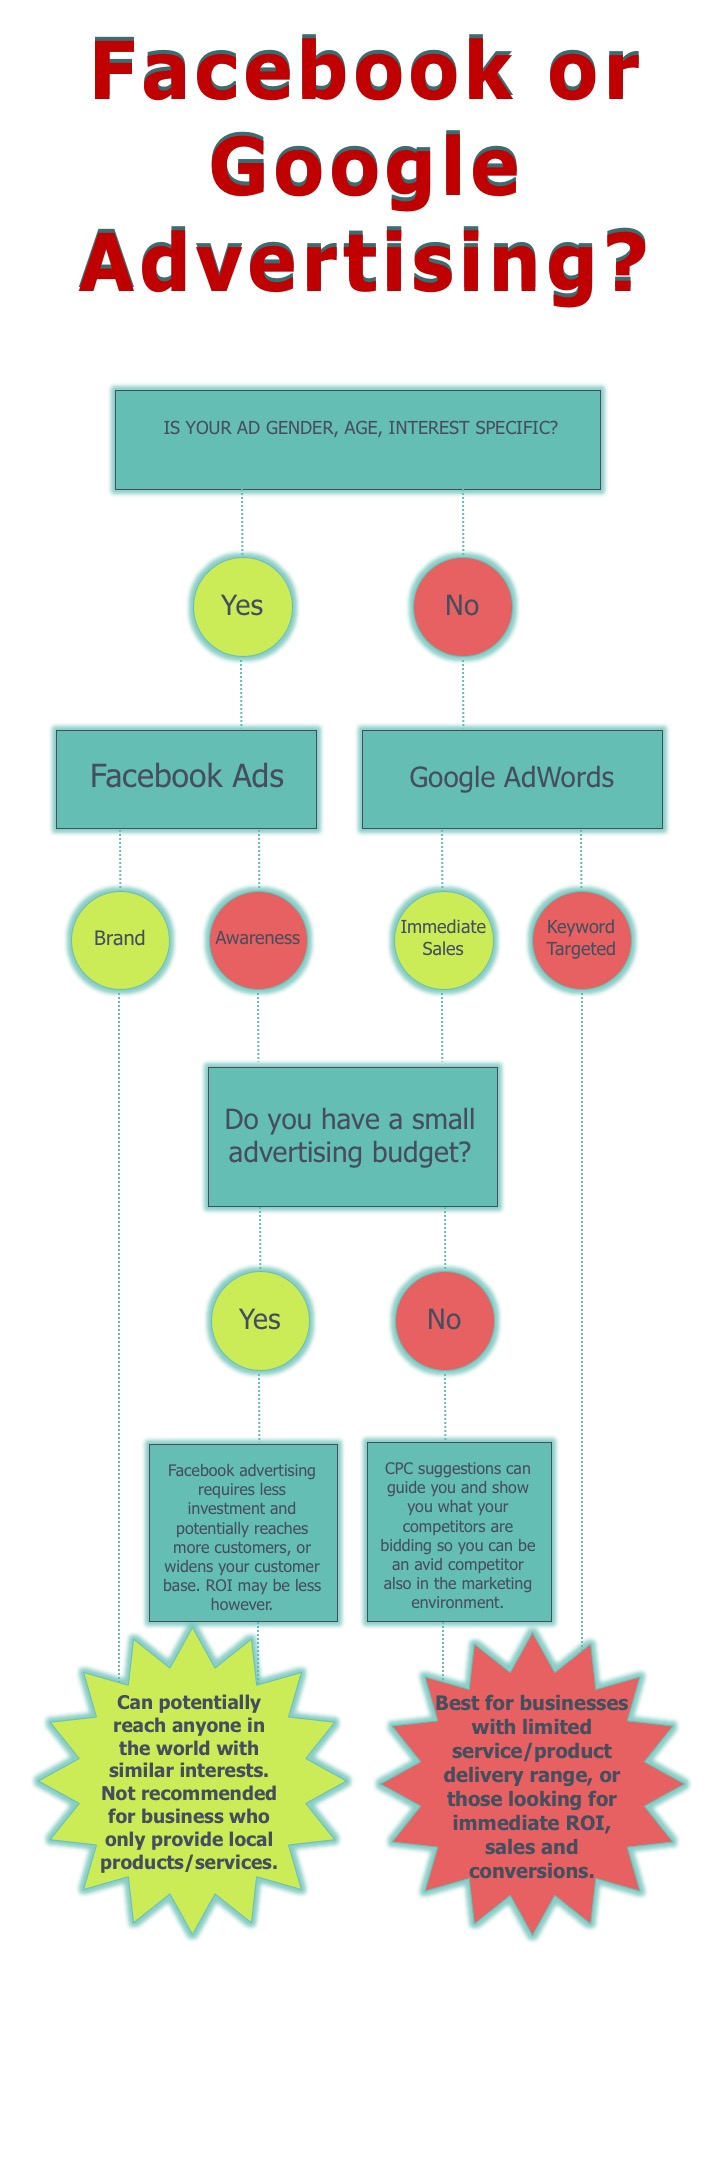 Facebook Advertising and Google AdWords